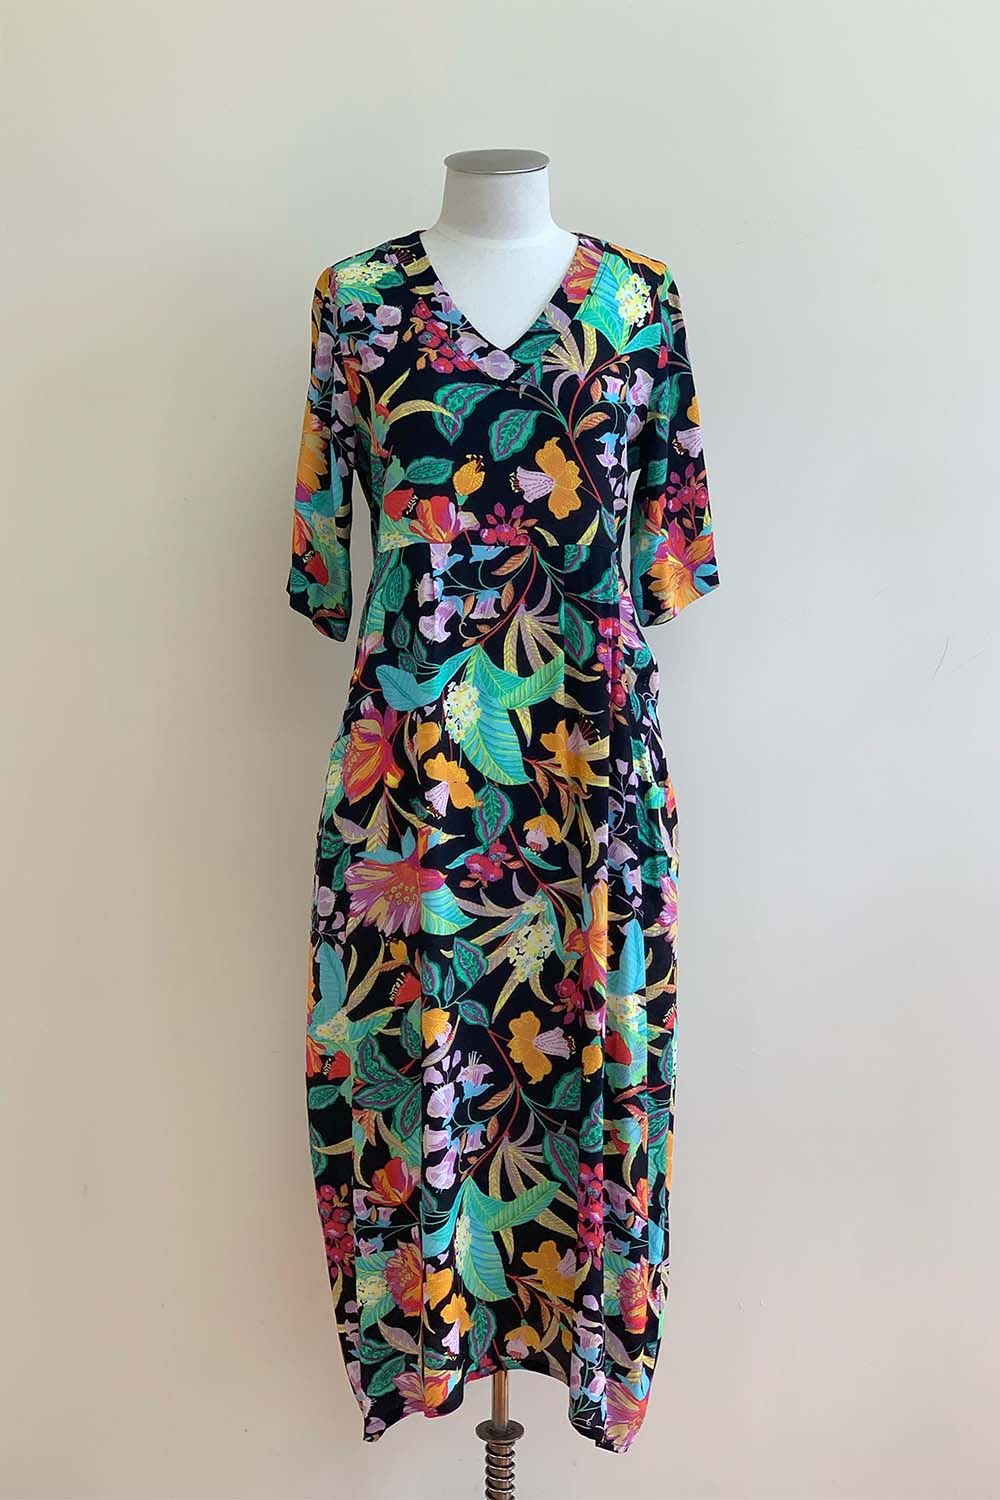 Bittermoon - Carly Dress - Tropical Pattern 100% Rayon Light Non Stretch Fabric 1 x 12 left